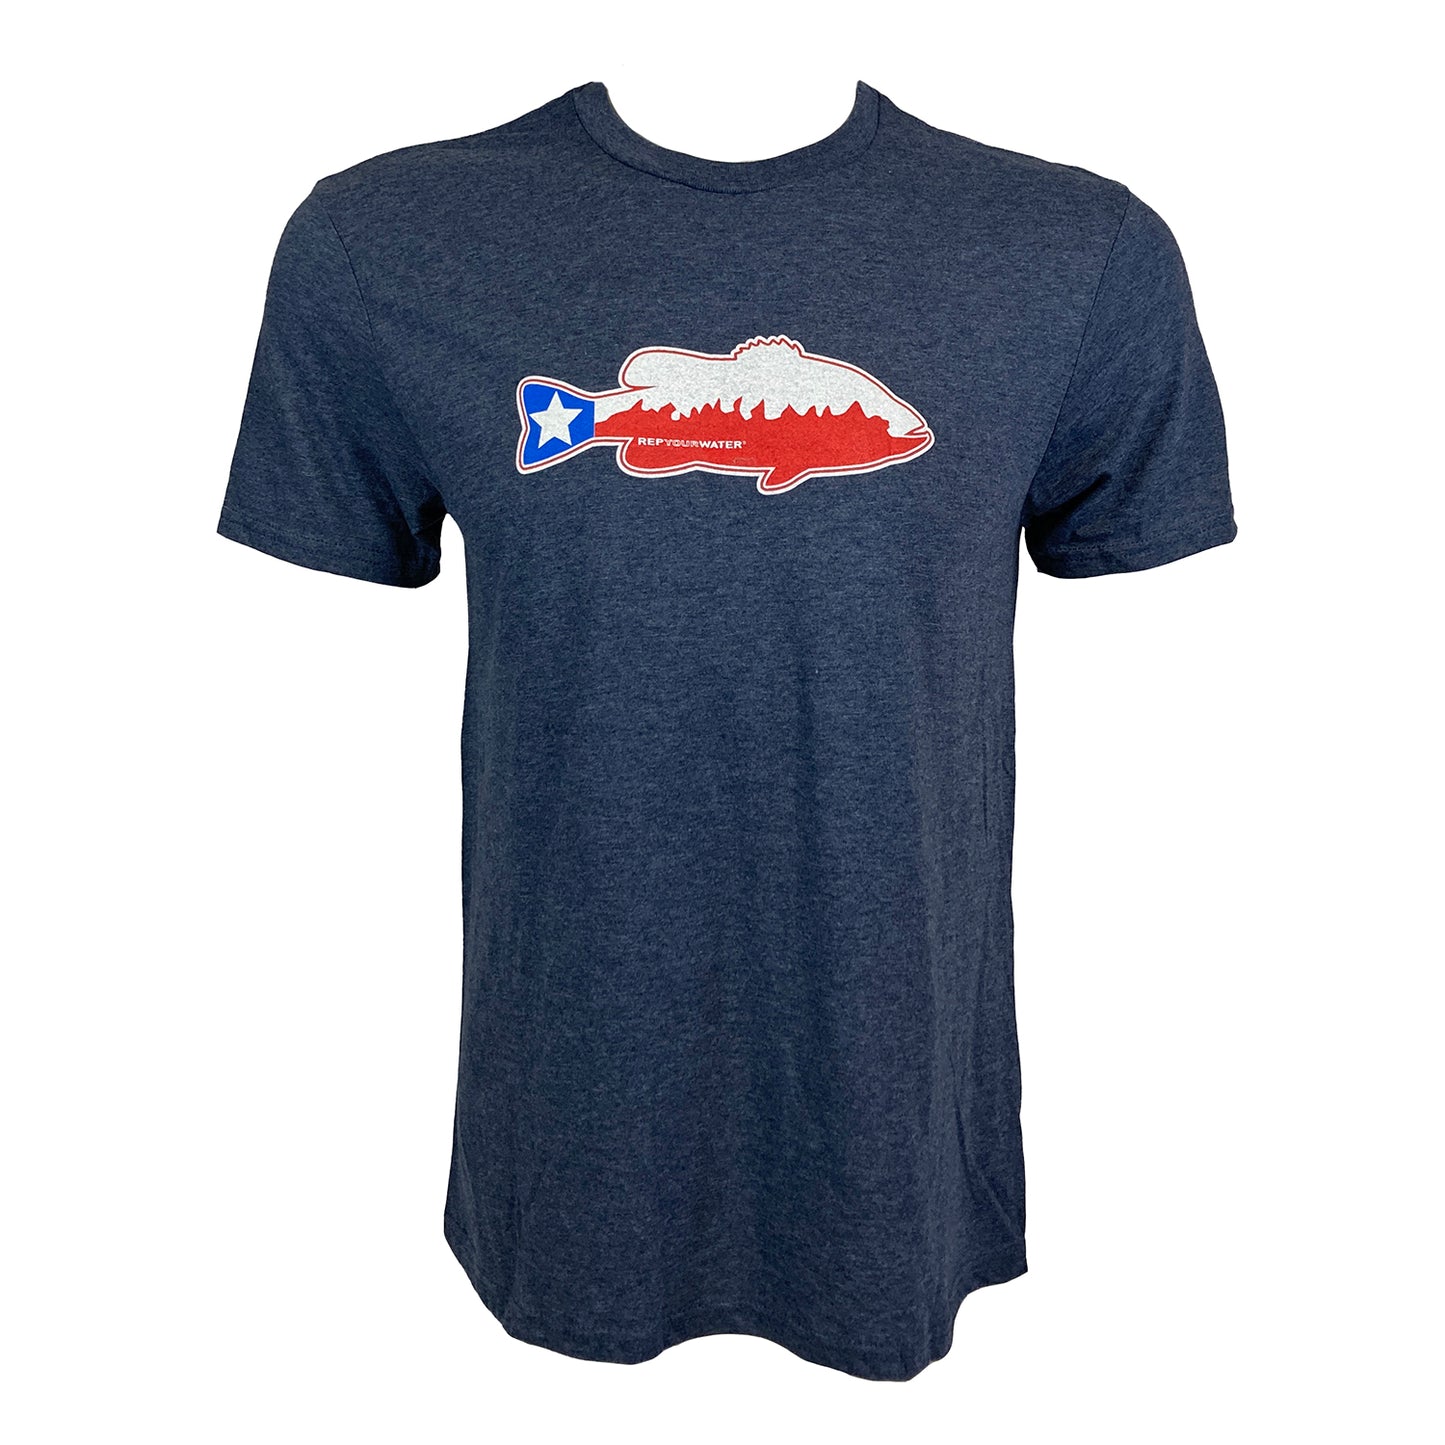 Blue tee shown from the front with Bass silhouette filled with Texas Flag across the chest.